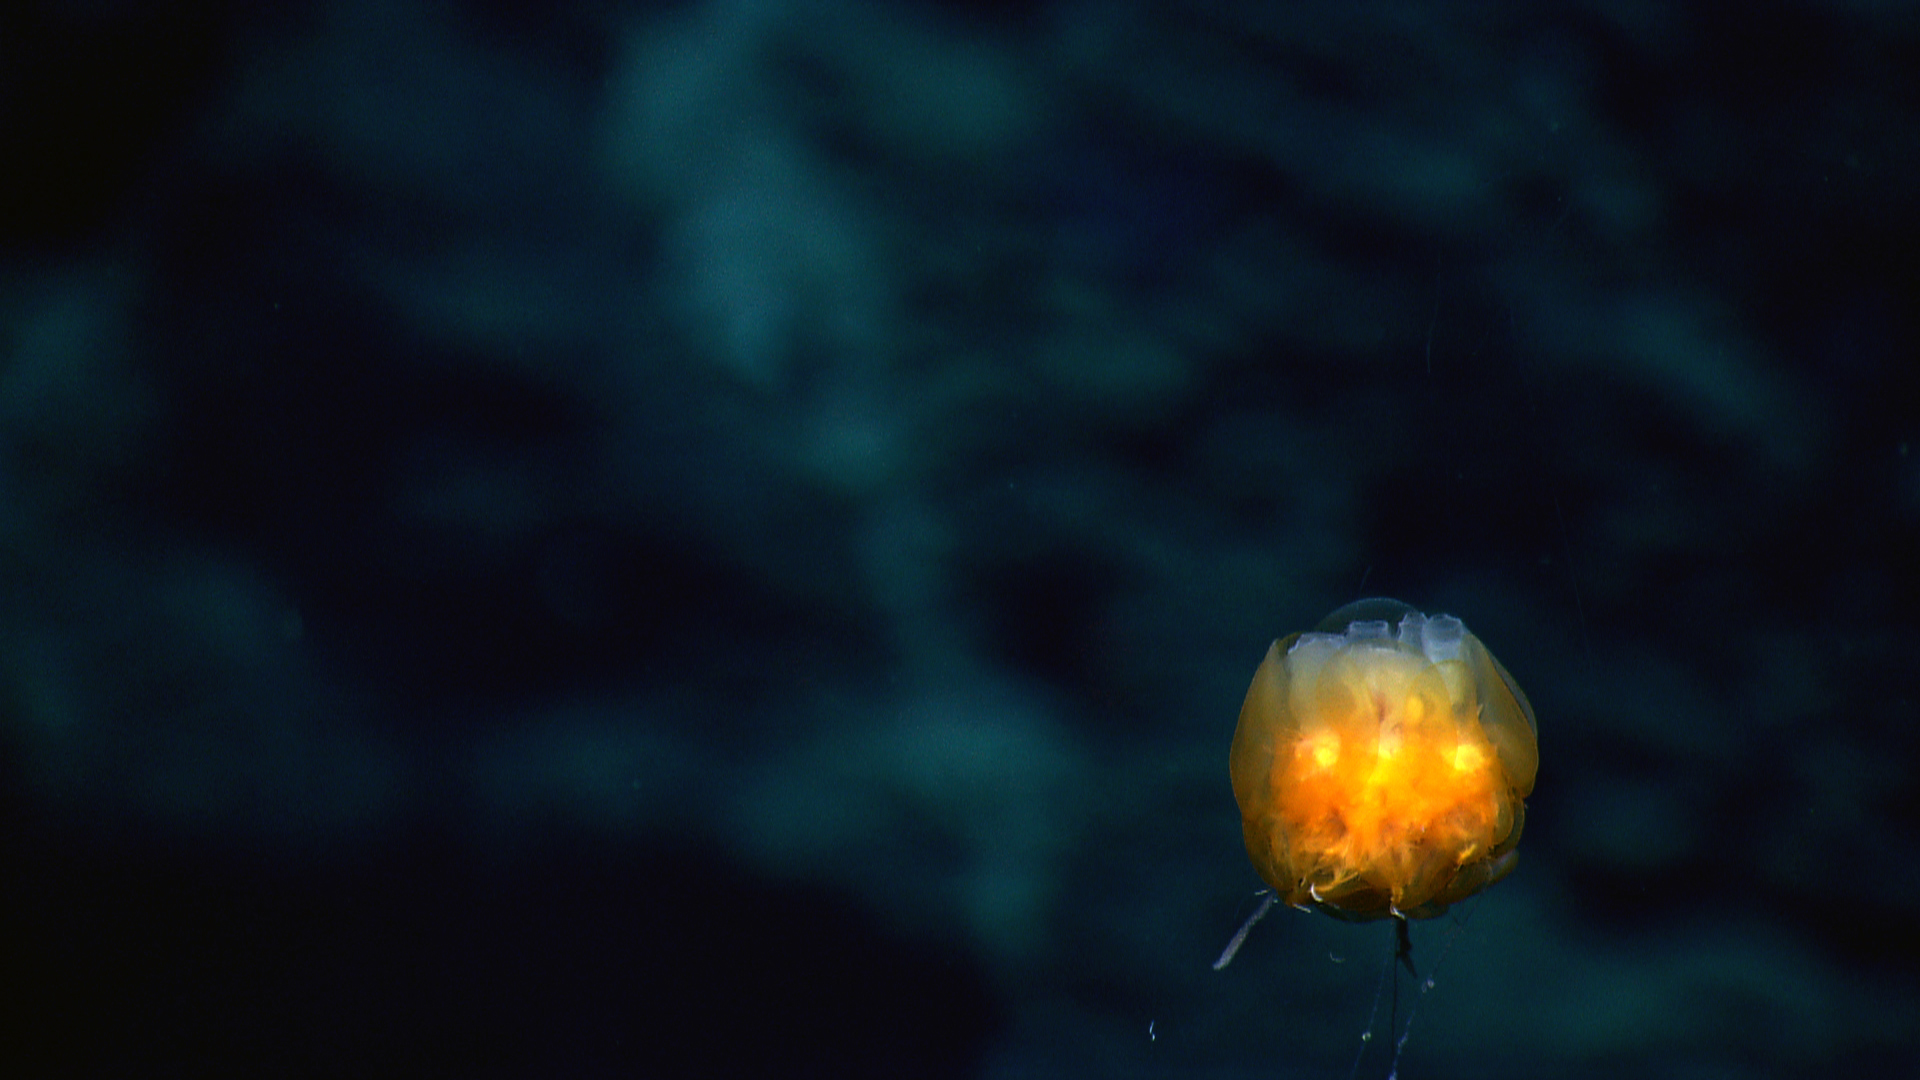 The ocean dandelion is a type of siphonophore, a collection of many animals that work together as a colony. Some members protect the colony, while others catch food or take care of reproduction.